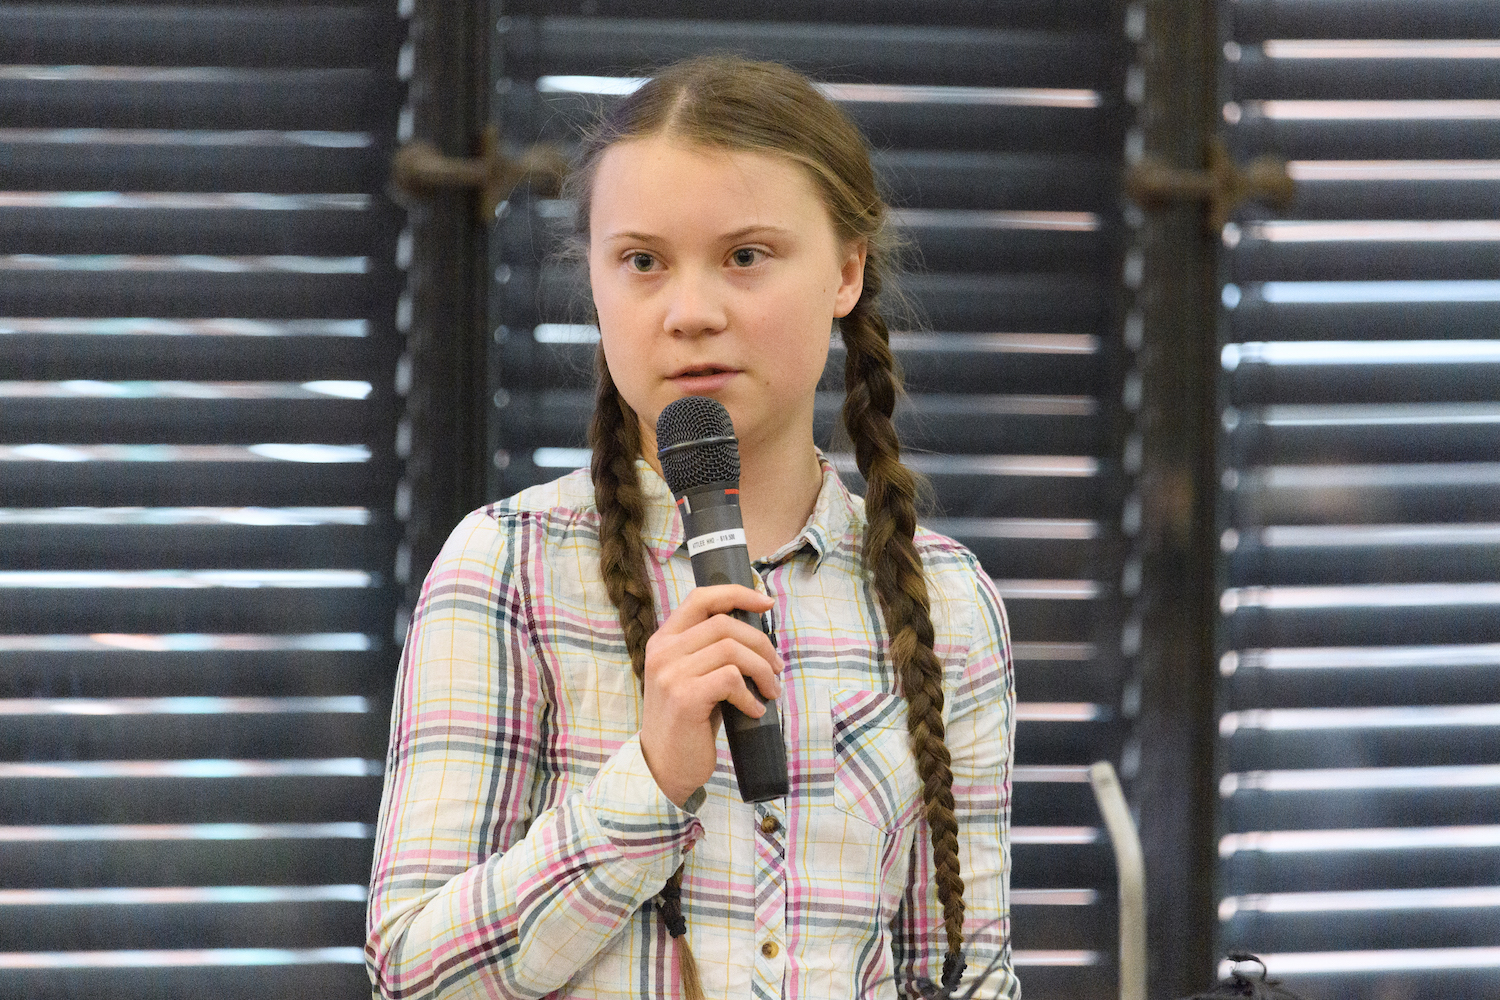 Greta Thunberg Addresses Parliament Climate Change Group Meeting - The Delite - Thedelite1500 x 1000